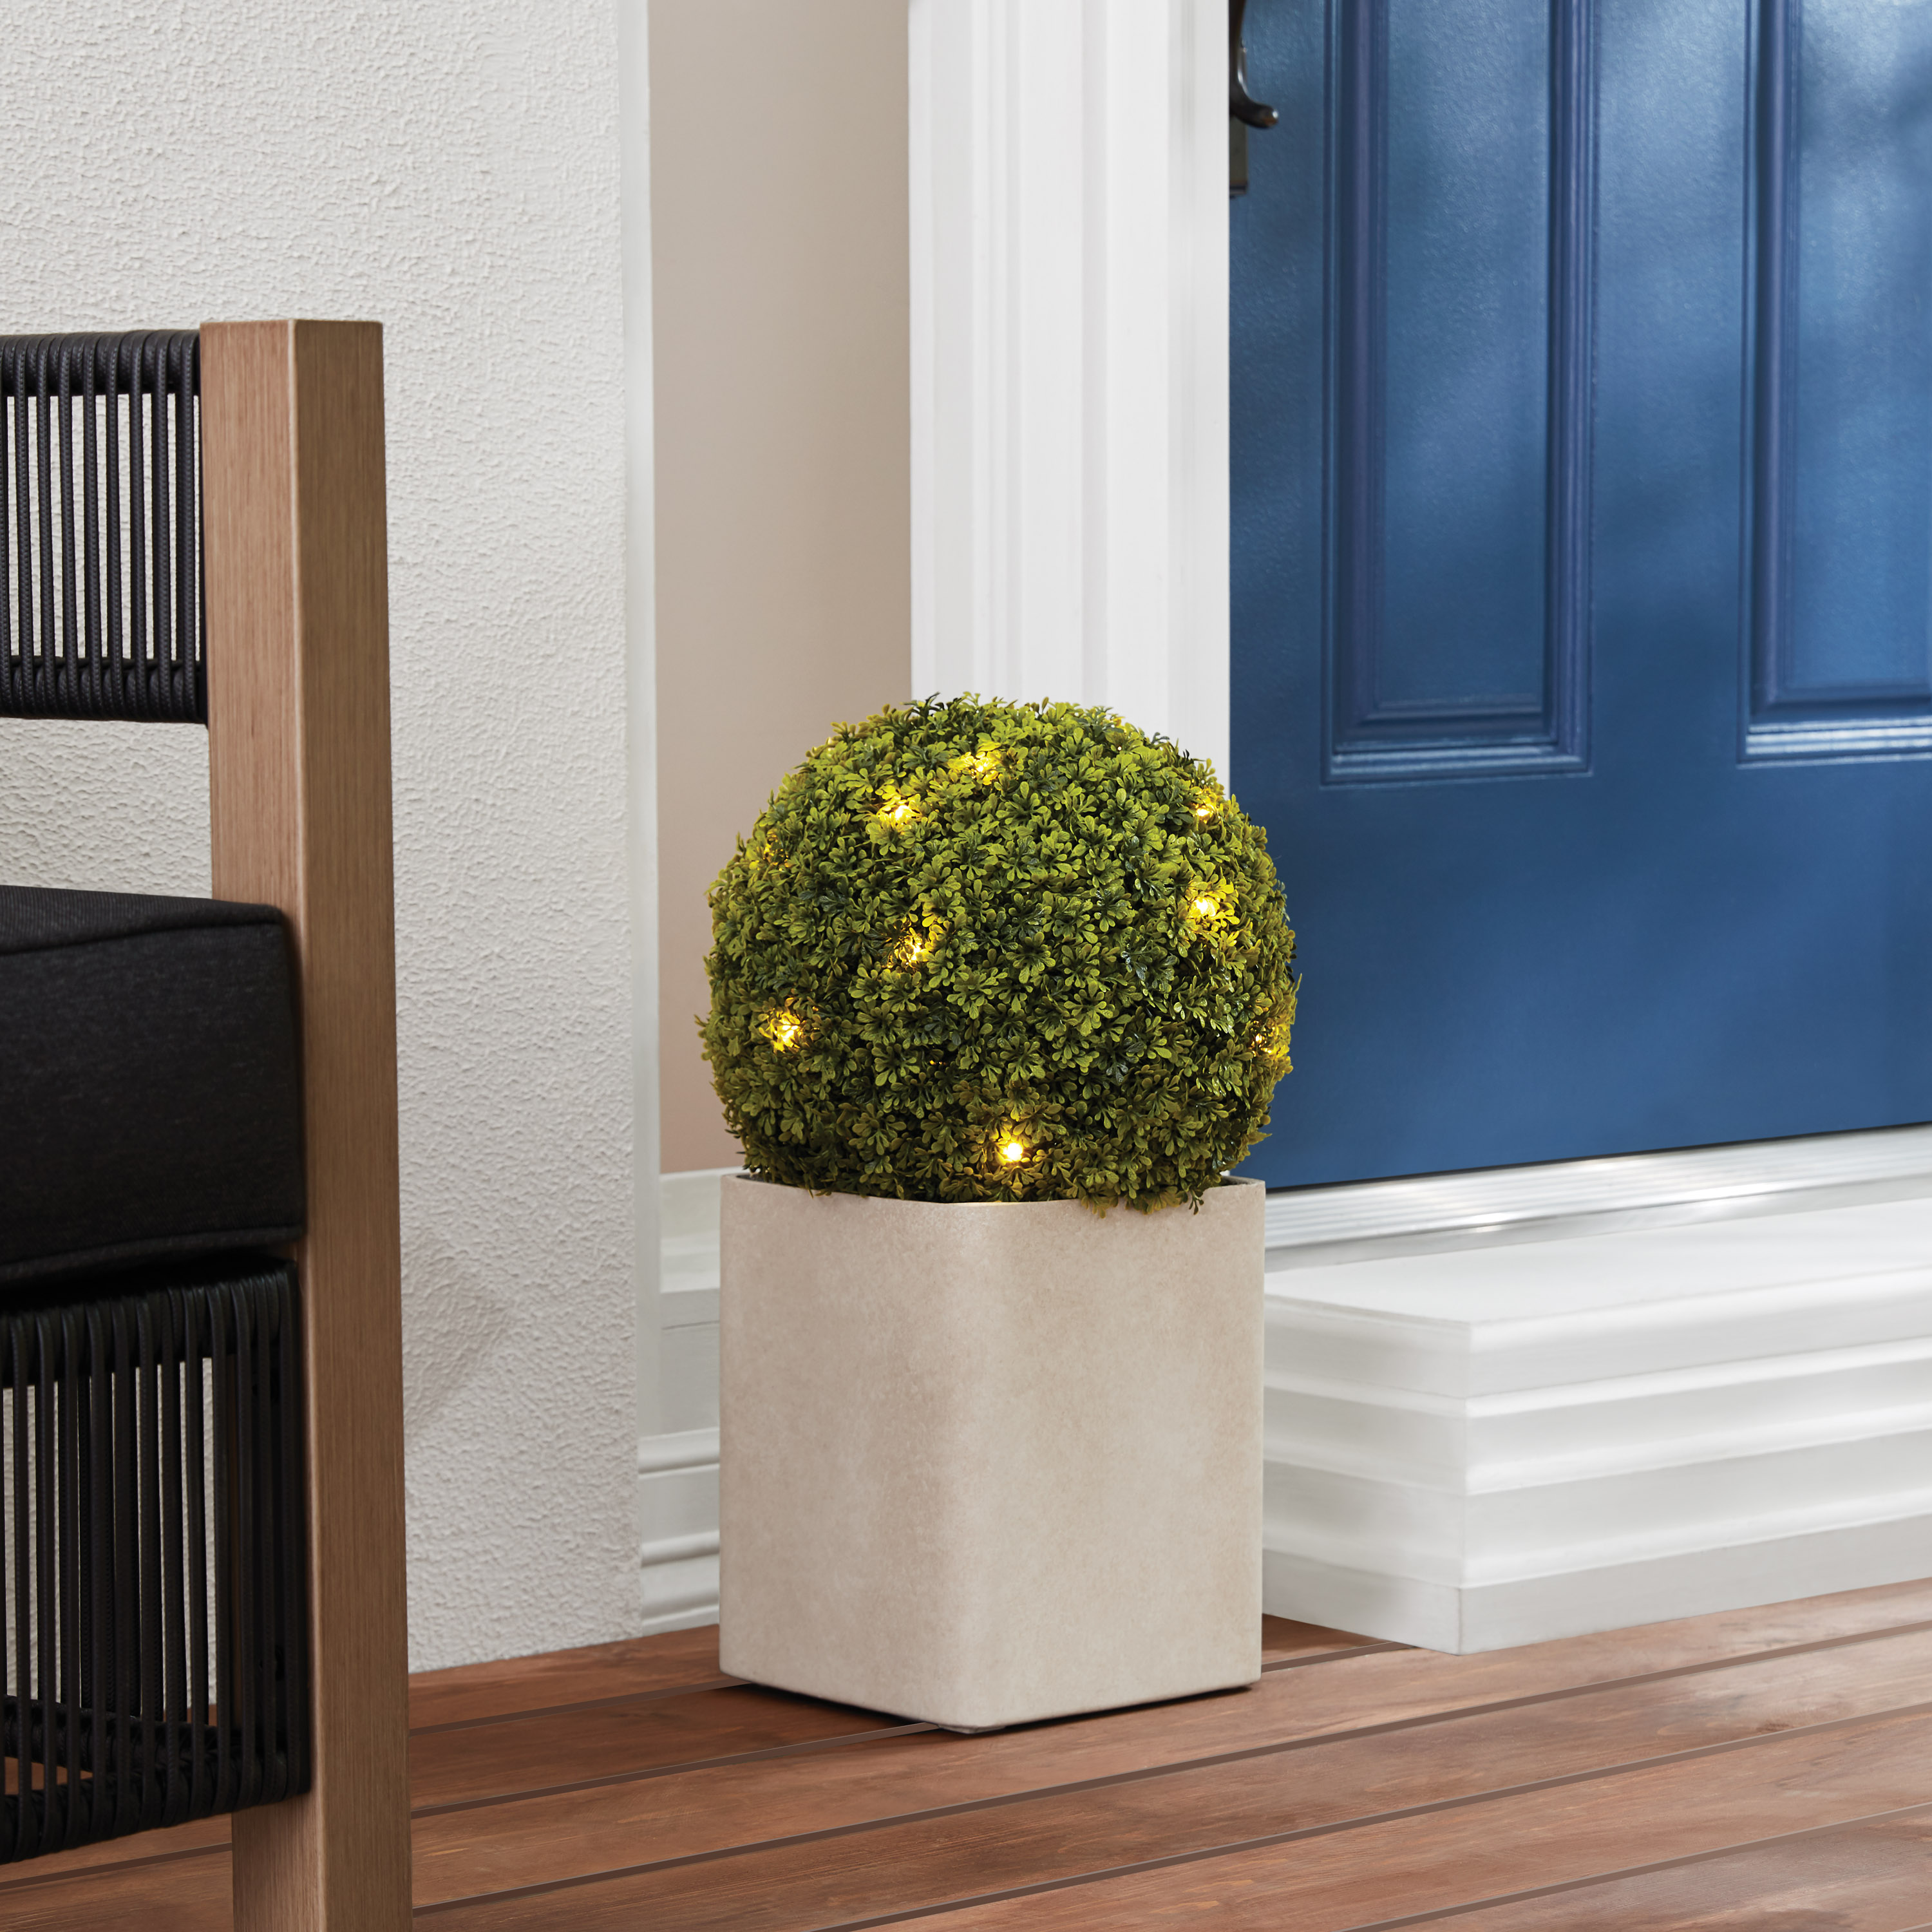 Better Homes & Gardens Outdoor Round 20"H Artificial Topiary Décor with Battery Powered Warm White LED Lights Eyebright - image 1 of 8